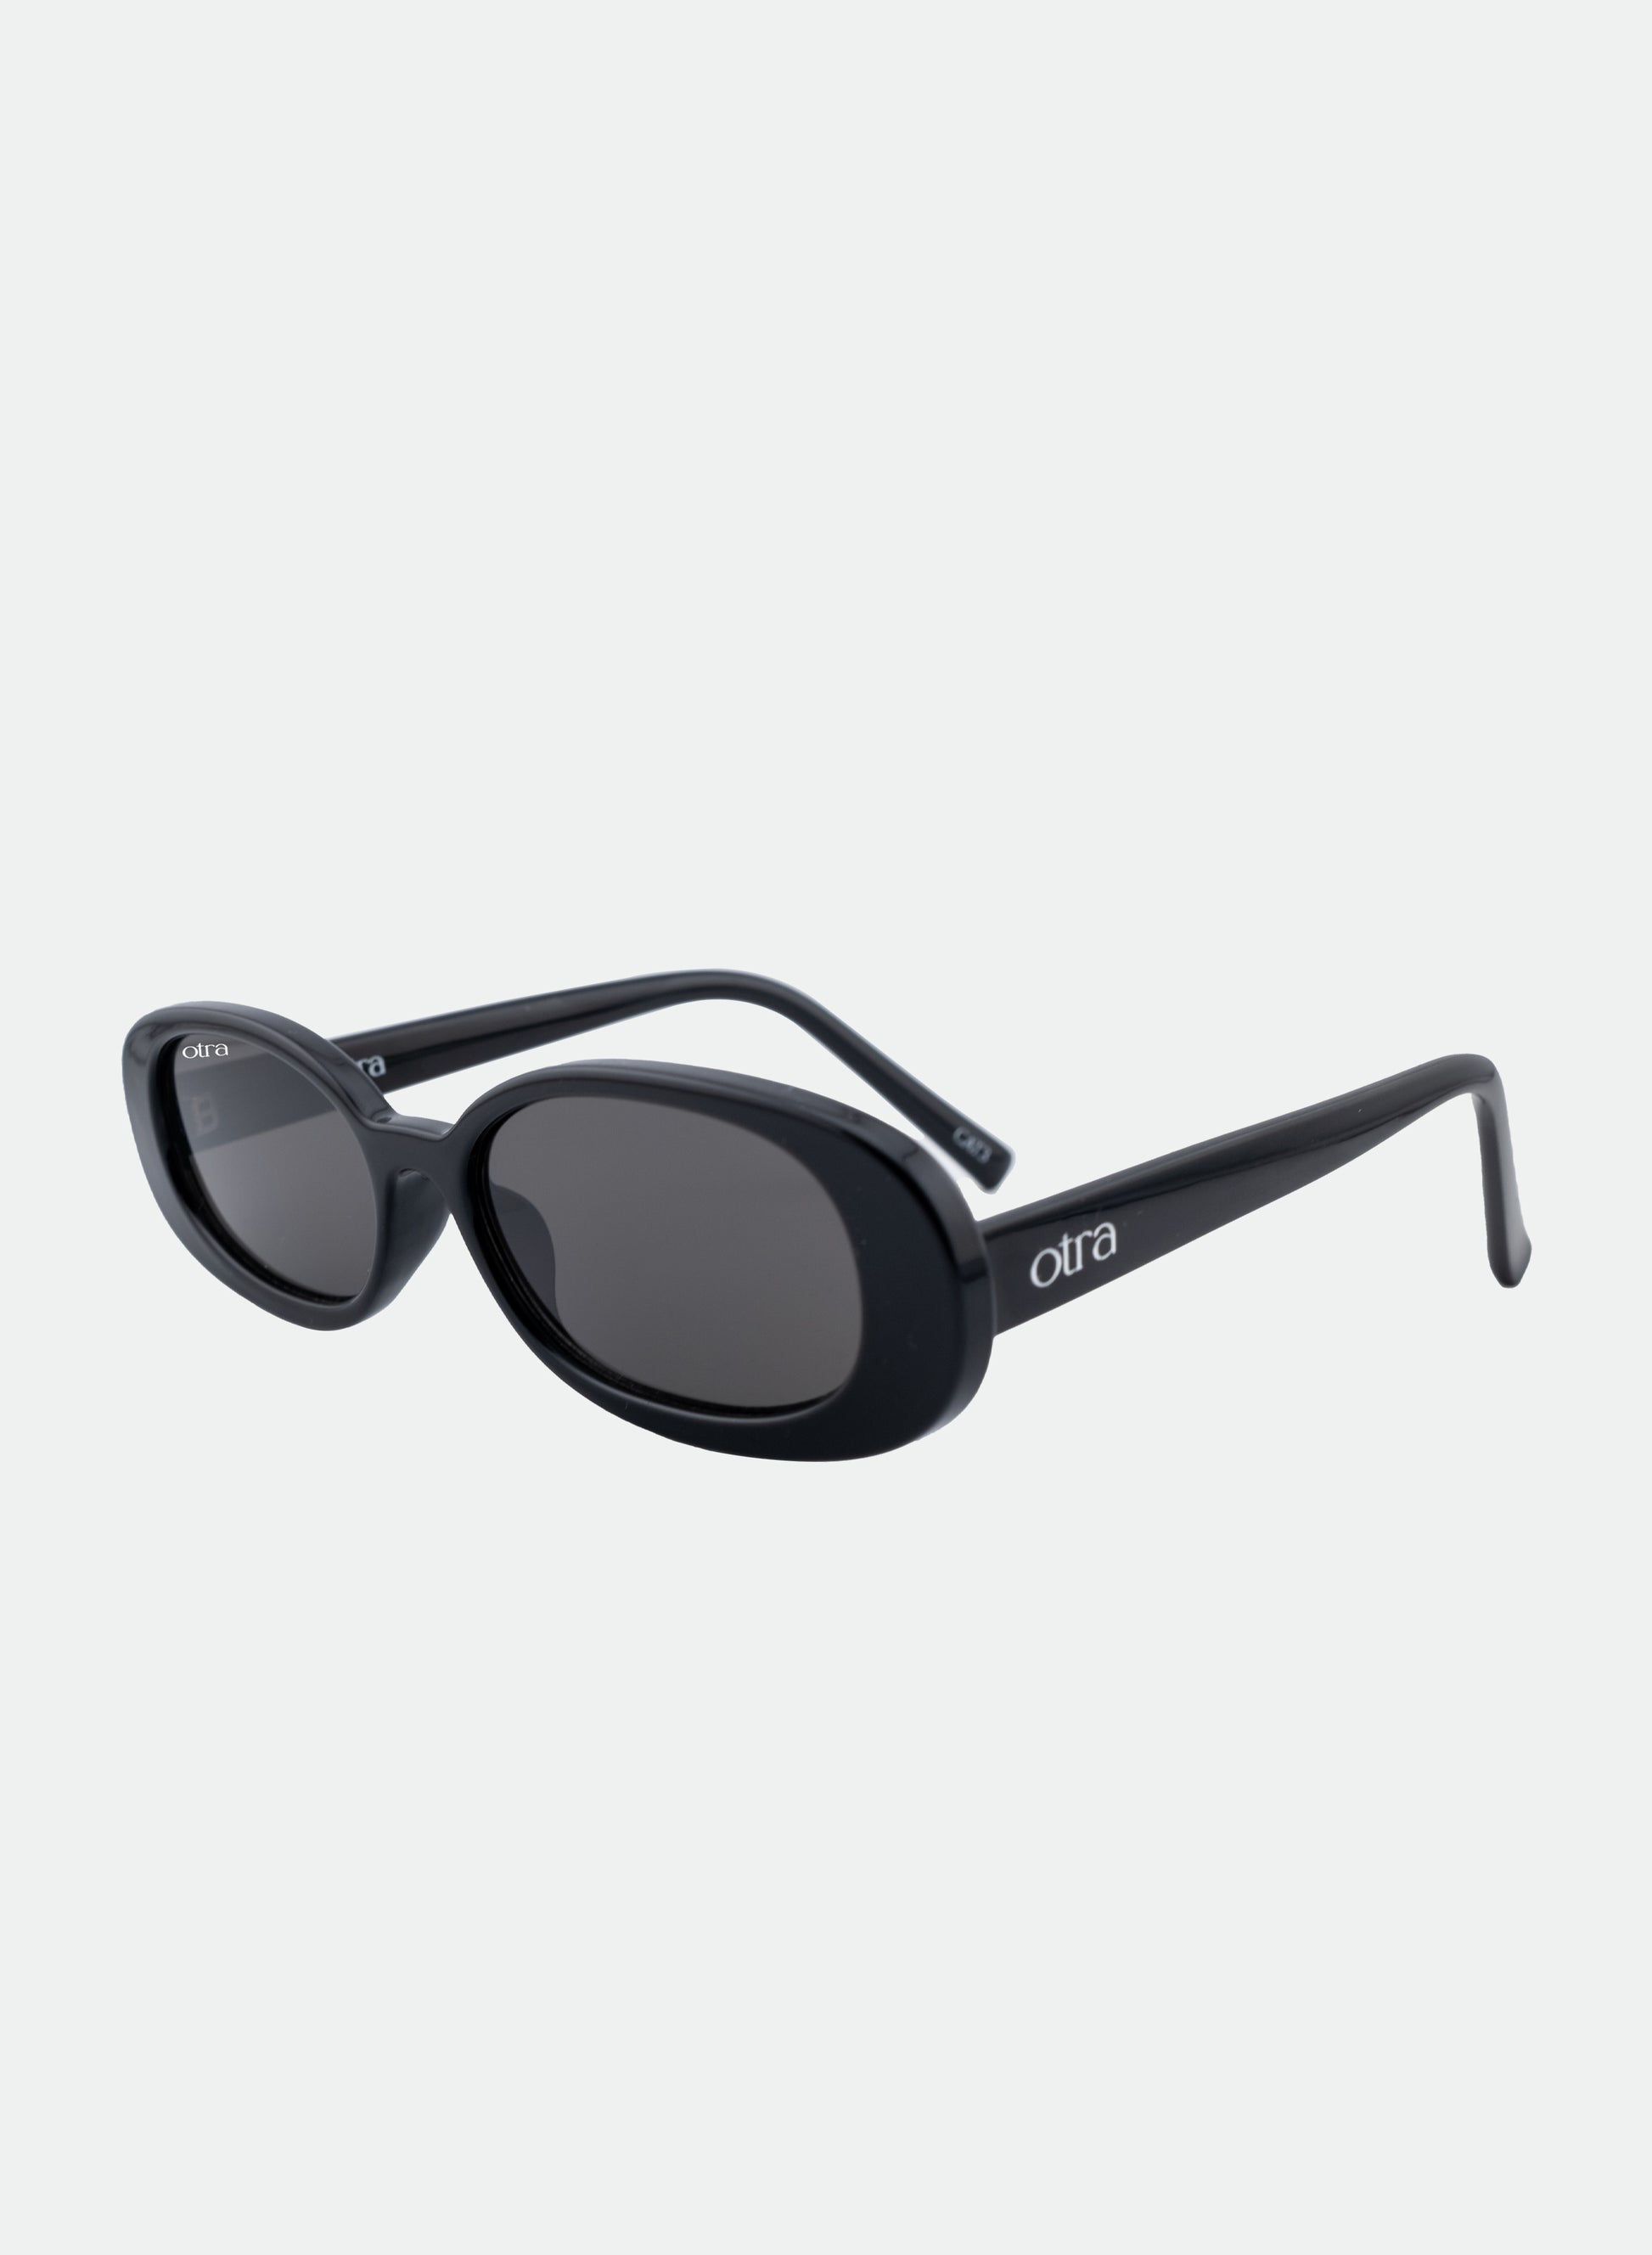 Gina sunglasses in black side view 